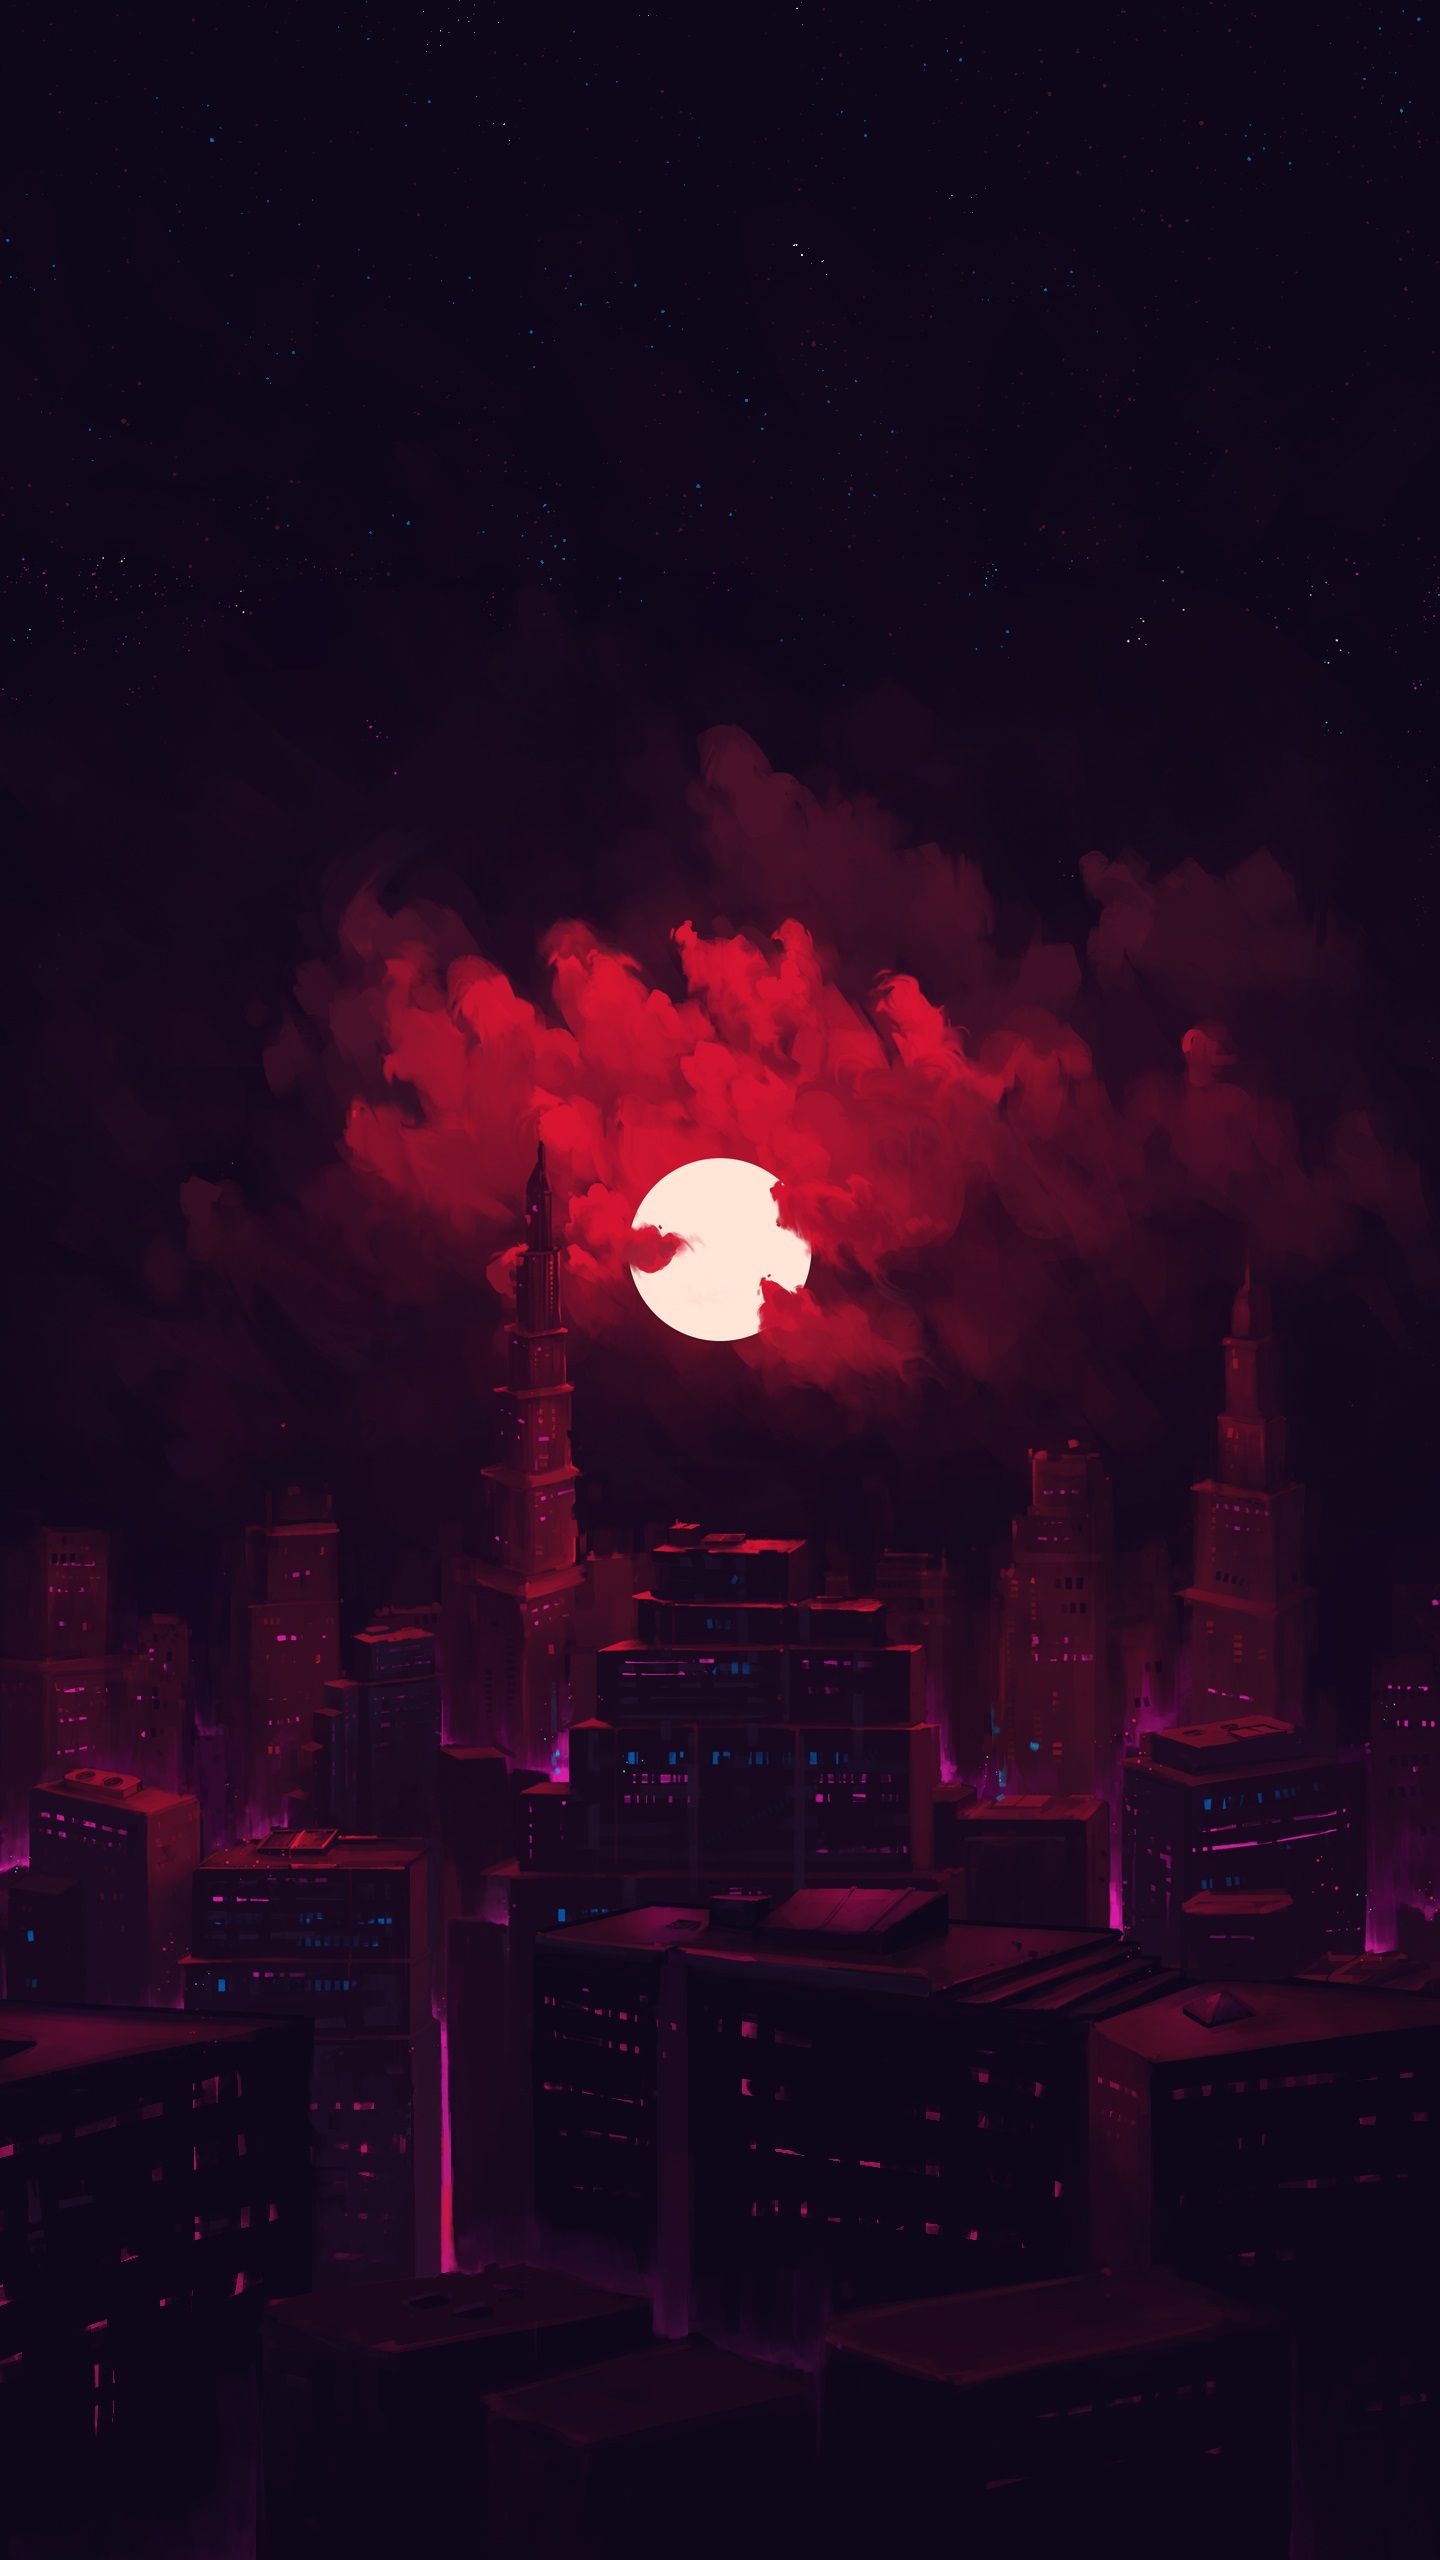 Red cityscape with a red moon - Crimson